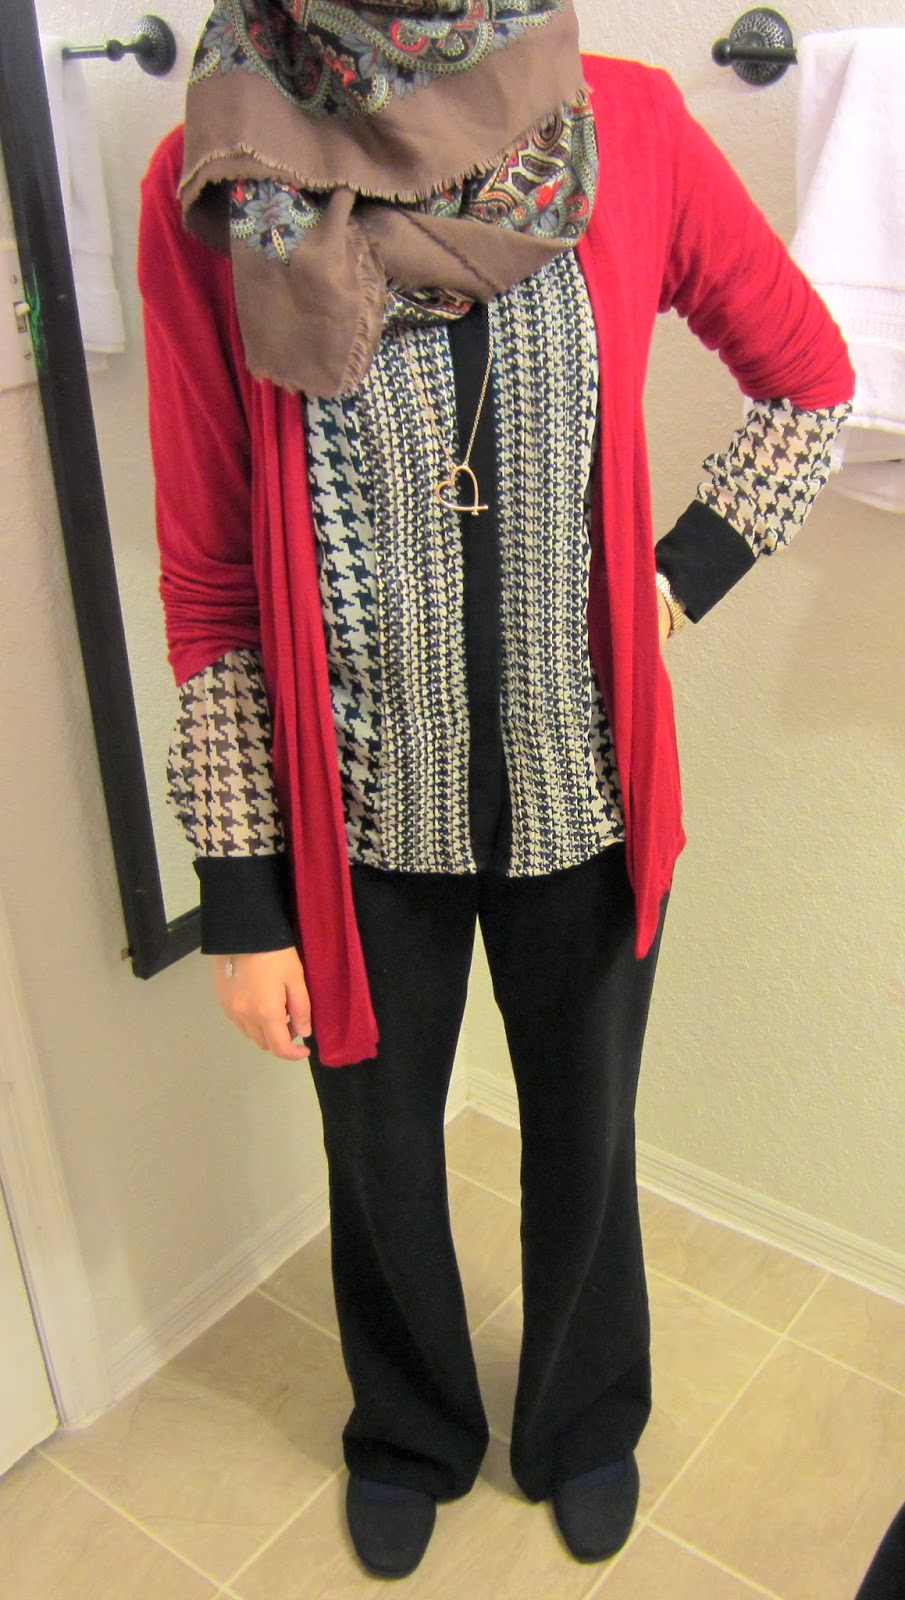 Eloquent Hijabi Date Night Hijab Outfit of the Day!